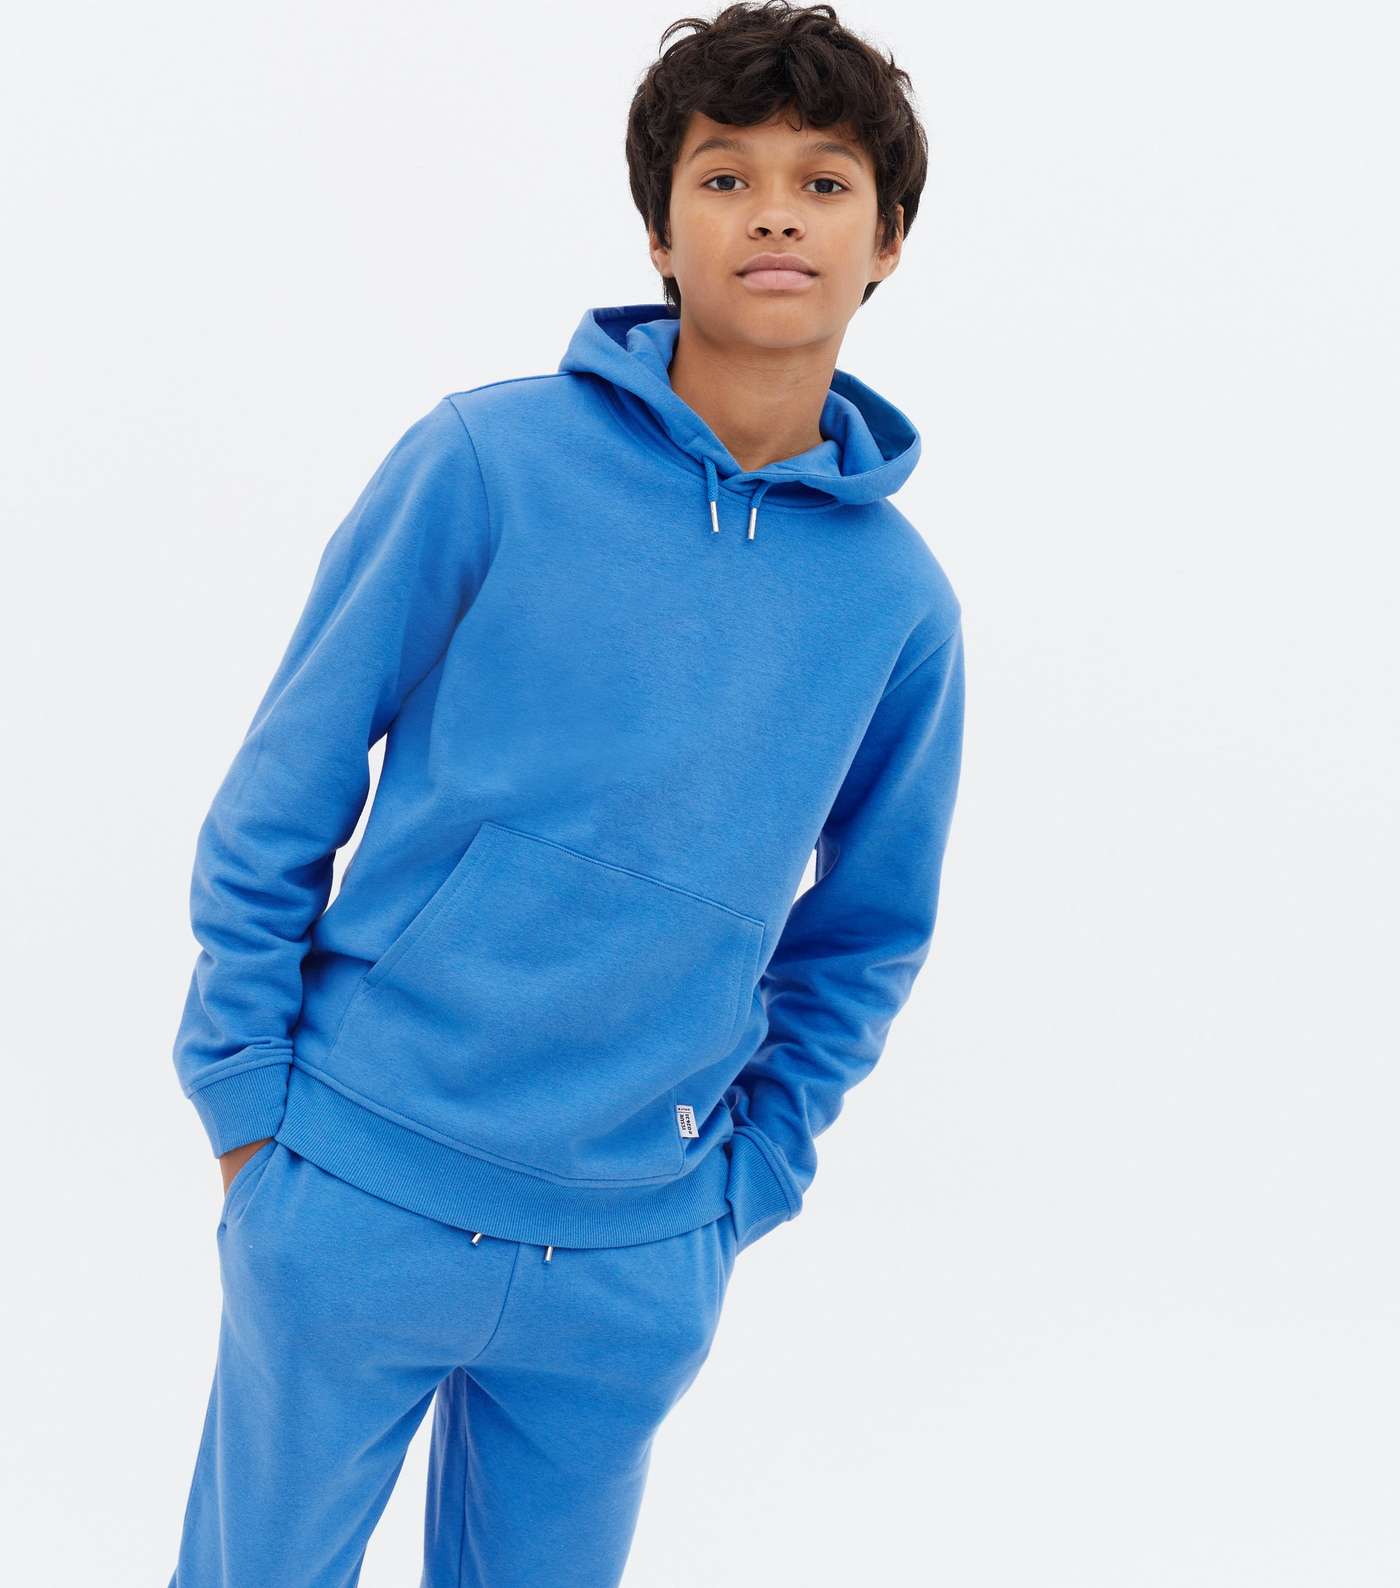 Boys Bright Blue Jersey Pocket Front Hoodie